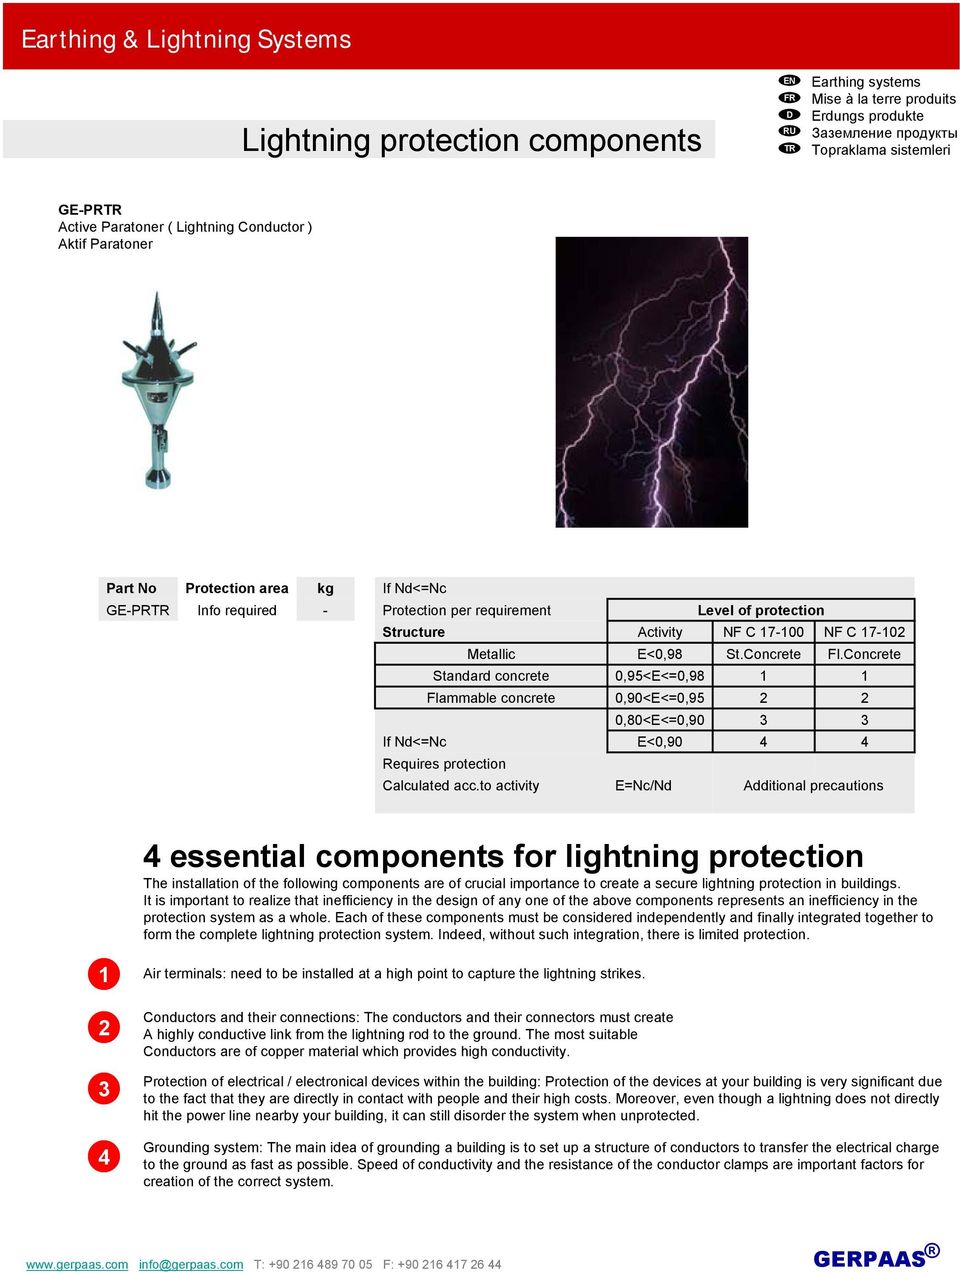 Concrete 0,95<E<=0,98 1 1 0,90<E<=0,95 0,80<E<=0,90 E<0,90 4 4 E=Nc/Nd dditional precautions 4 essential components for lightning protection The installation of the following components are of